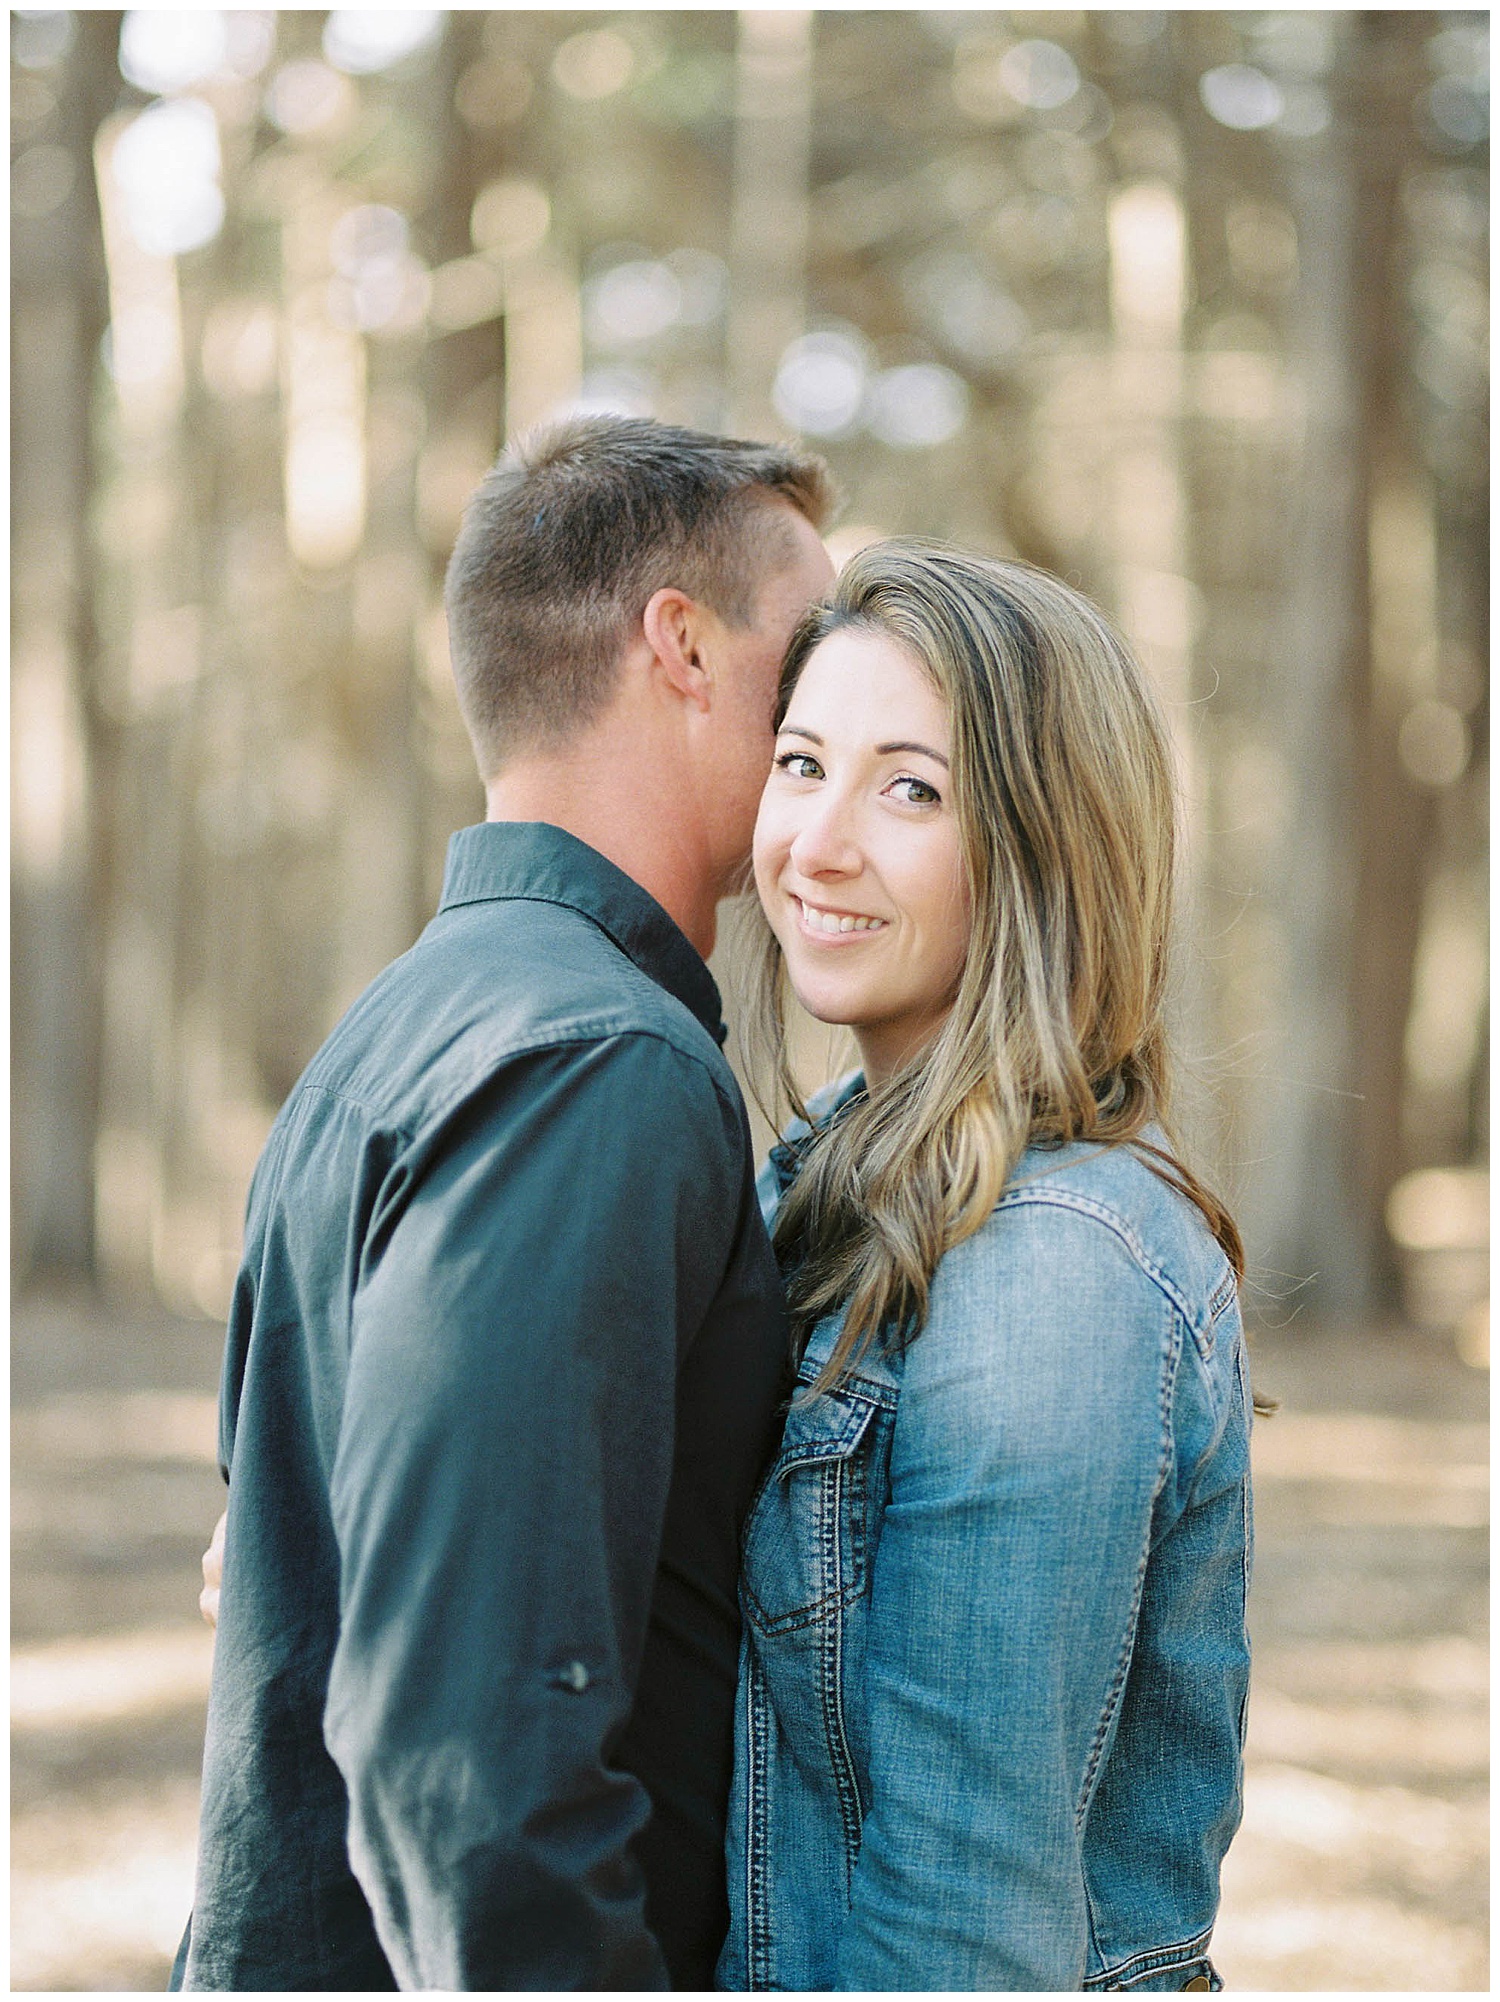 san francisco wedding and portrait photographer shooting an engagement session in half moon bay california using both film and digital medium